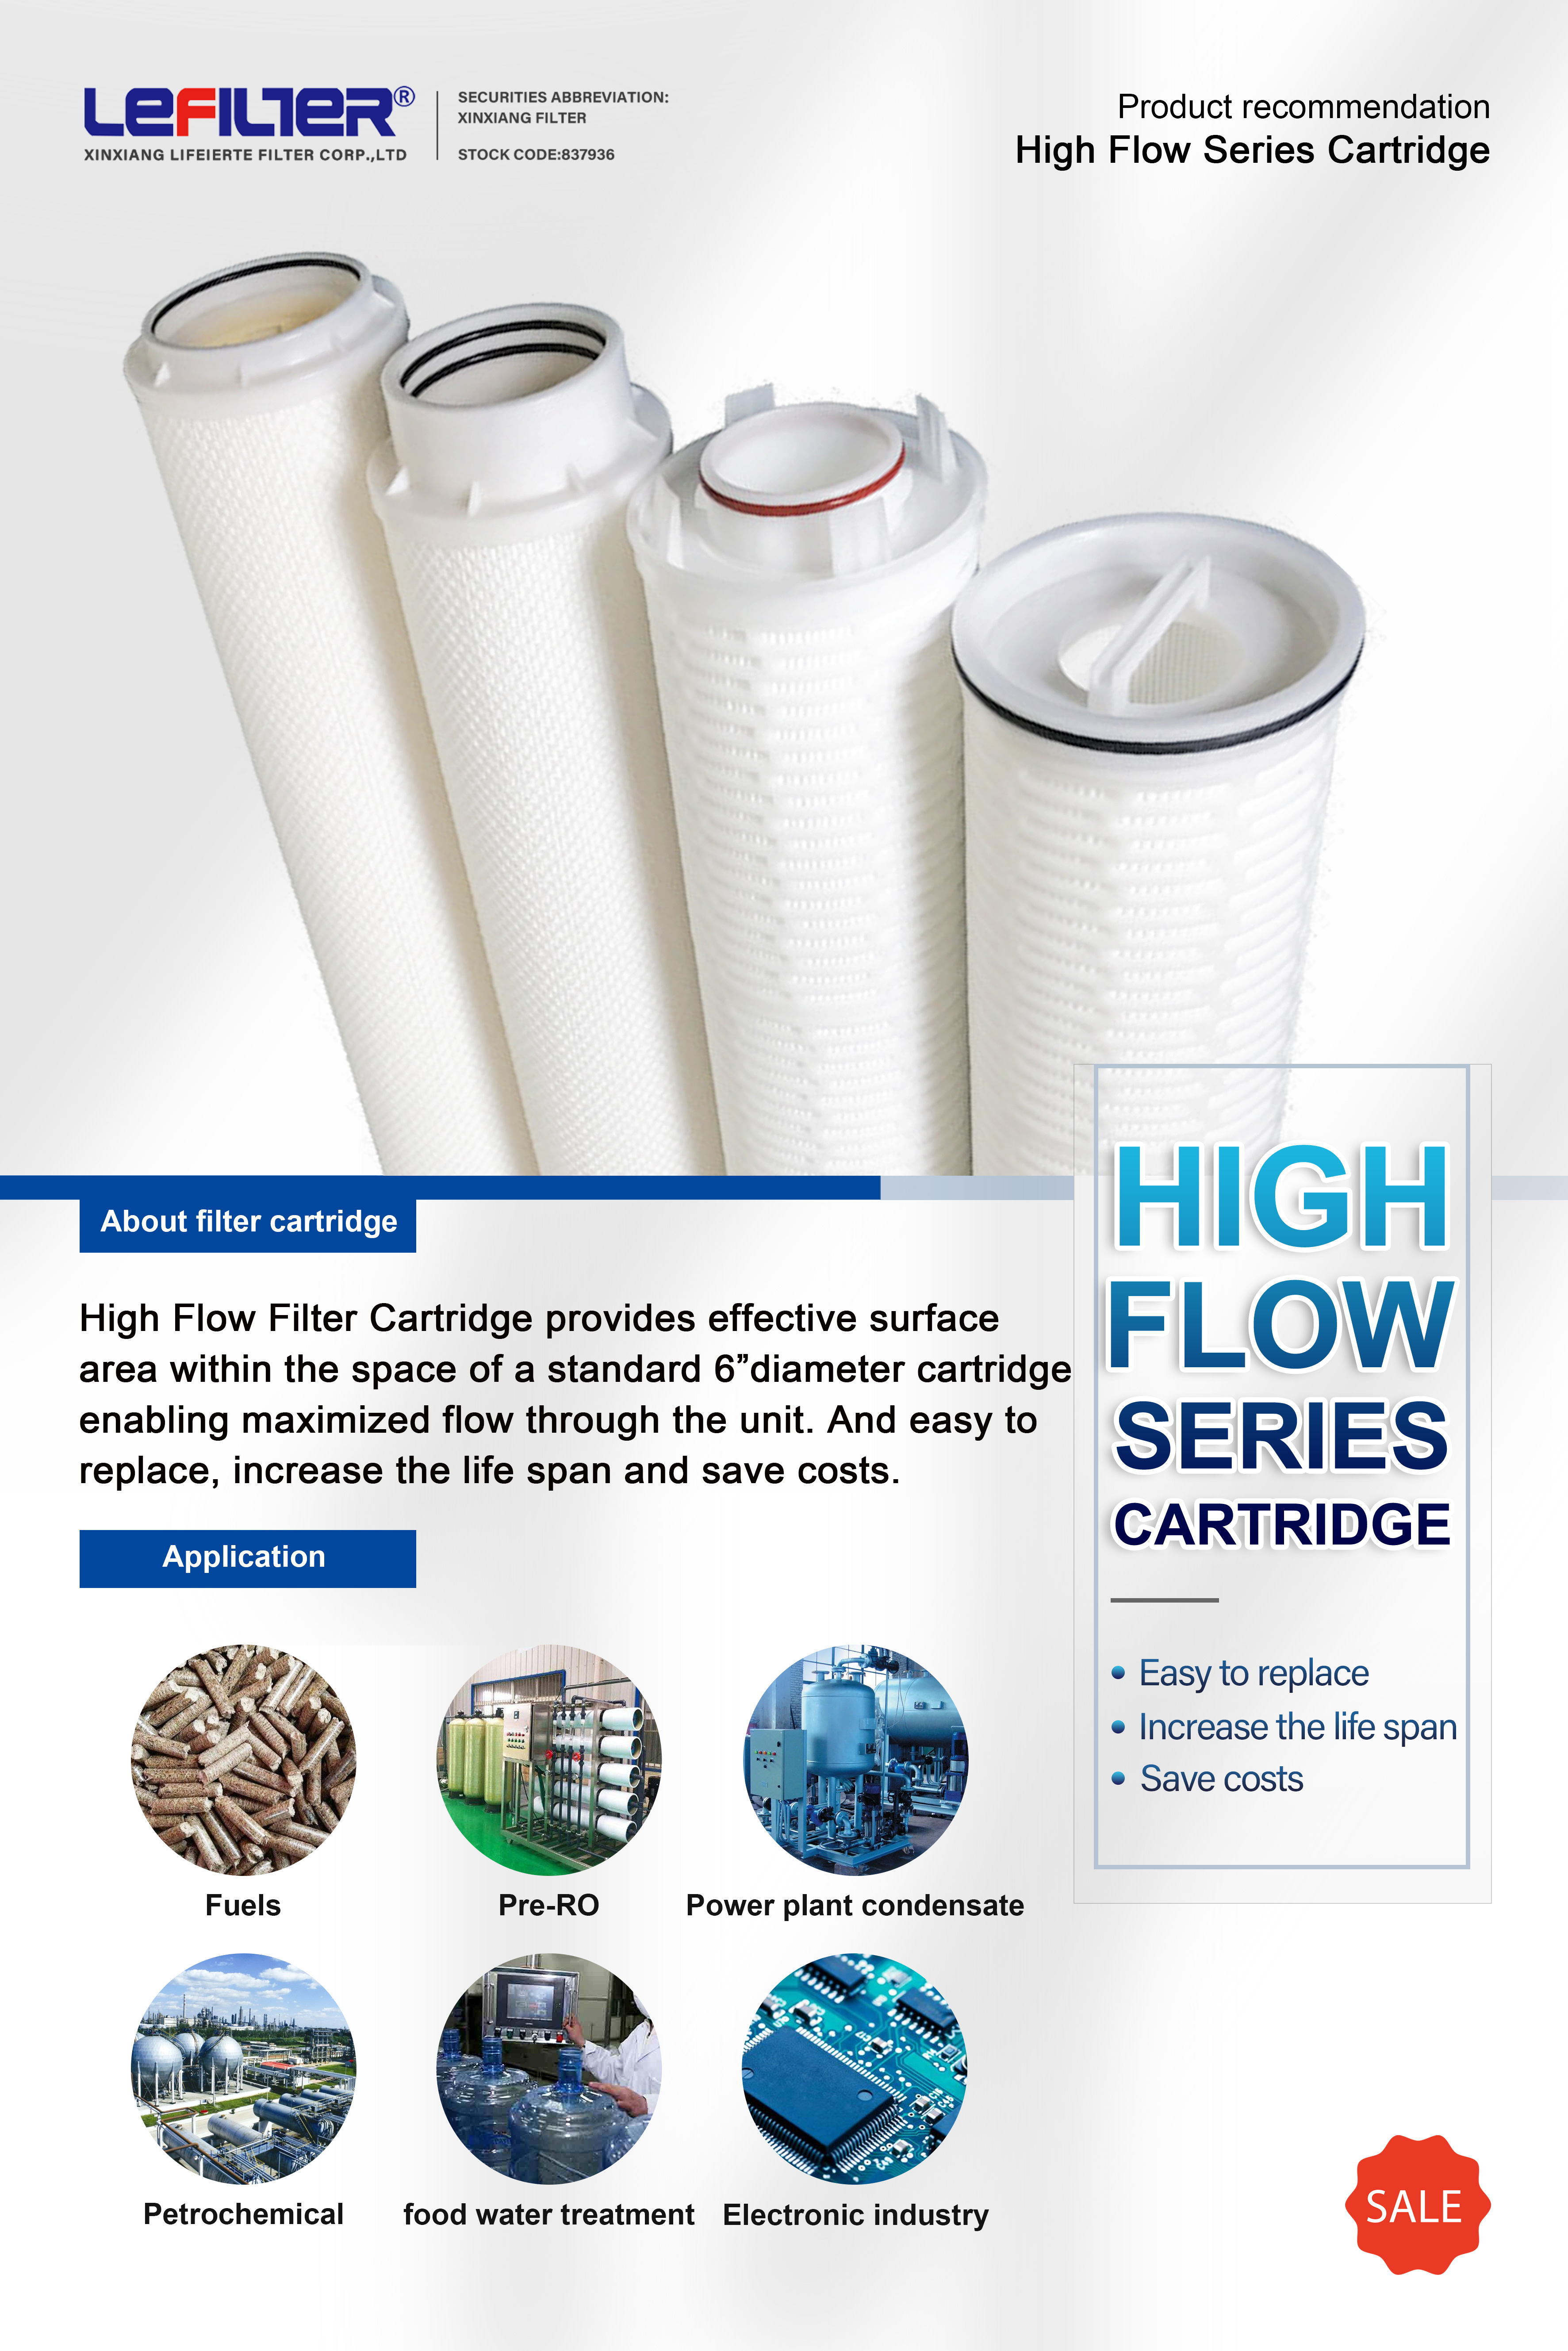 The Benefits of High-Flow Filters